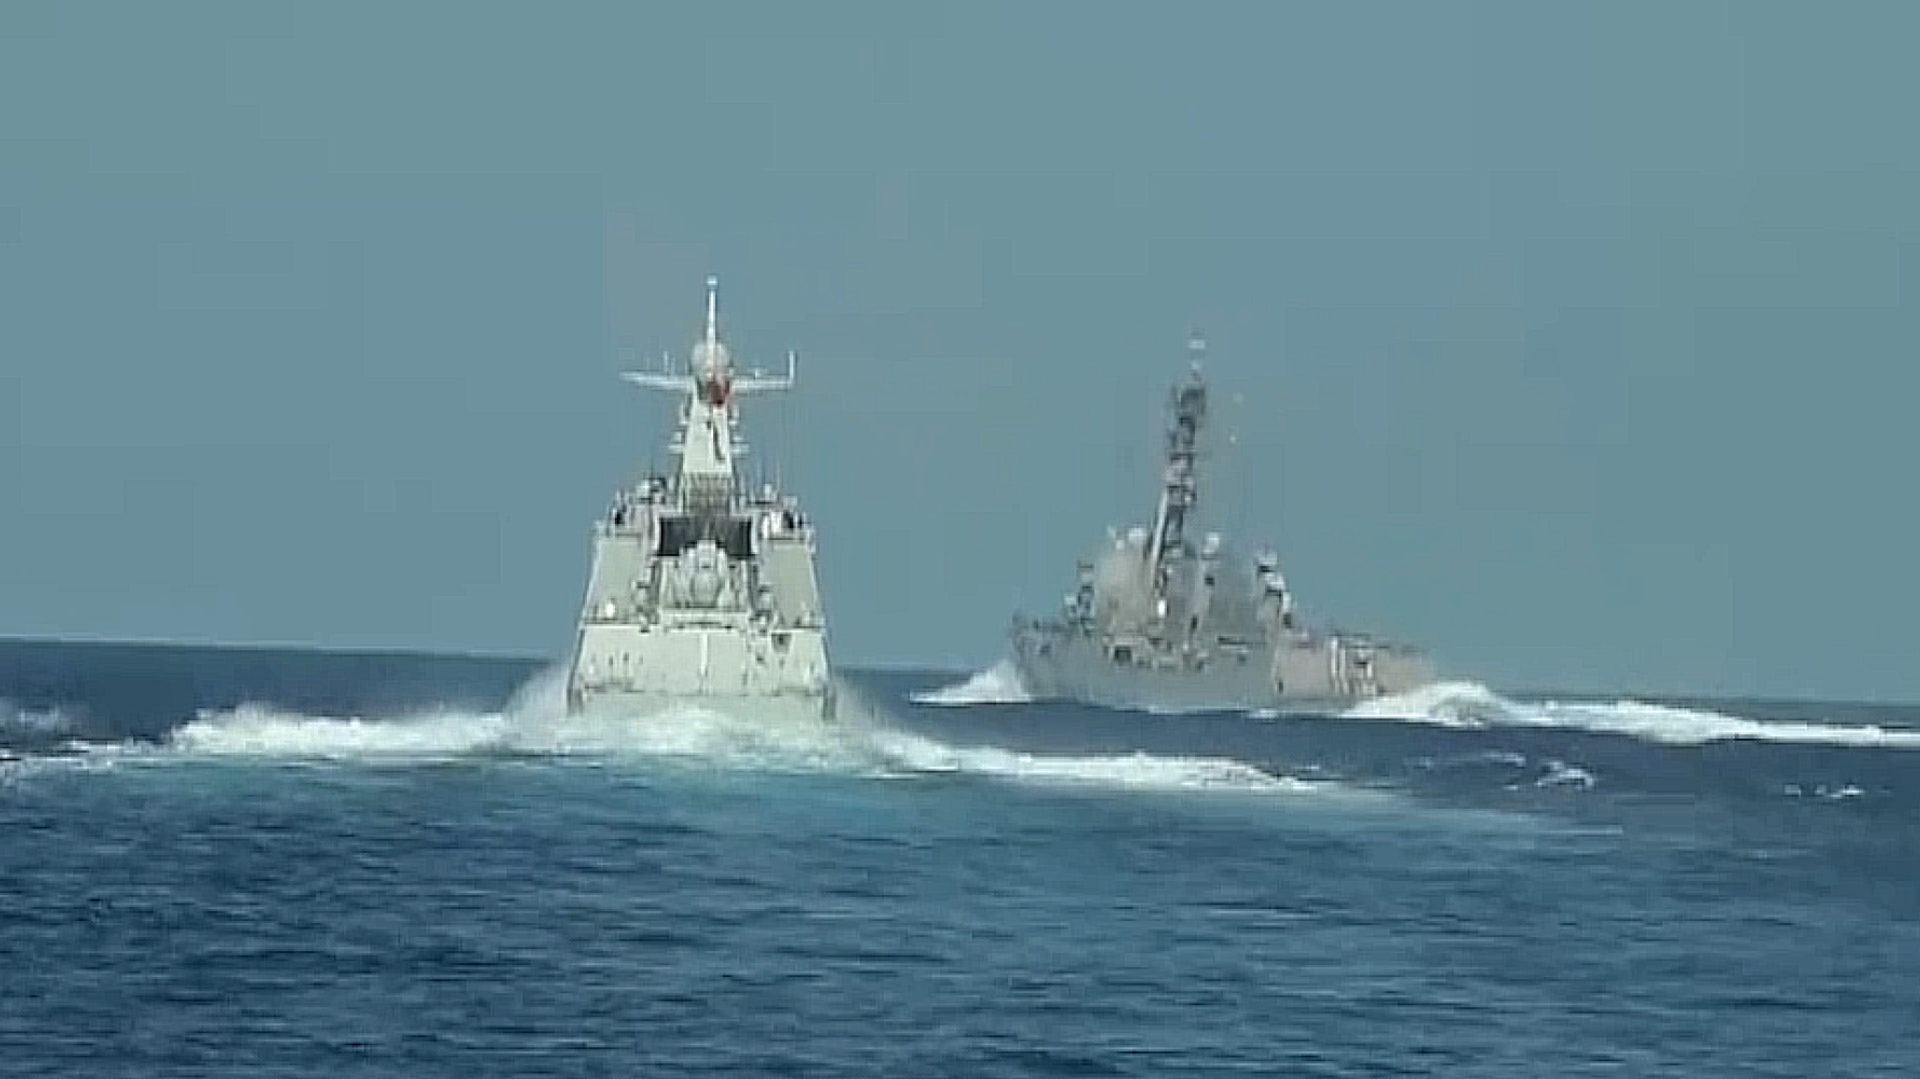 The American destroyer USS Ralph Johnson (right) is seen cutting across the bow of the Chinese frigate Guilin (left) in an encounter on August 19 in the South China Sea. The Chinese Ministry of National Defense released footage of the incident on October 26, calling it an unfettered provocation that violated several regulations governing safe encounters between ships at sea. - Sputnik International, 1920, 06.12.2023